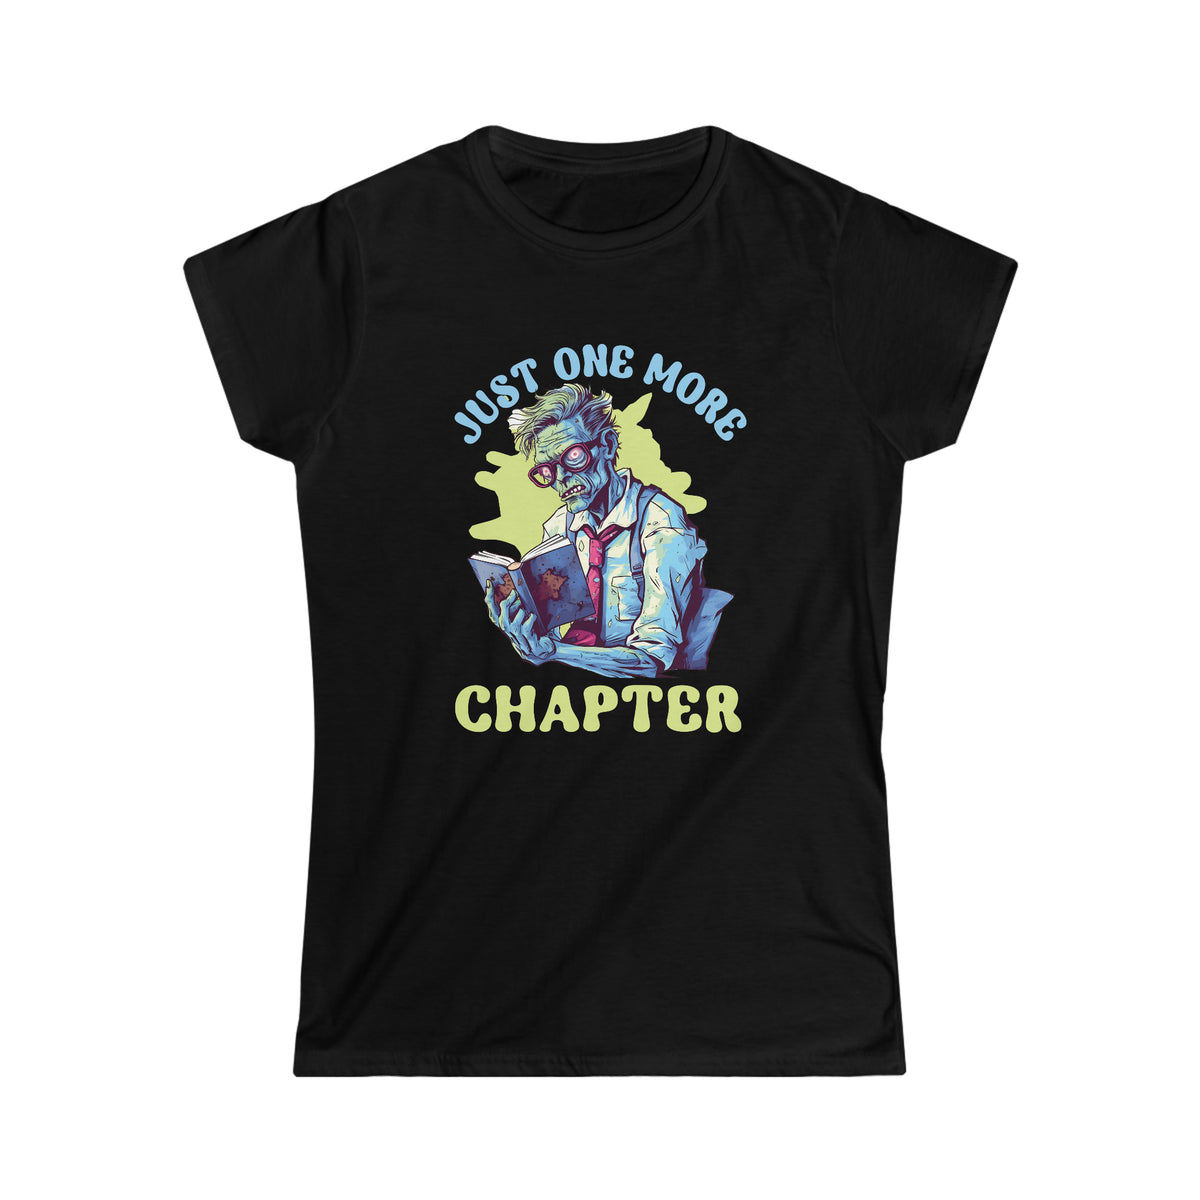 Just One More Chapter Zombie Shirt | Halloween Book Shirt | Book Lover shirt | Book Lover Gift  | Women's Slim-fit Soft Style T-shirt